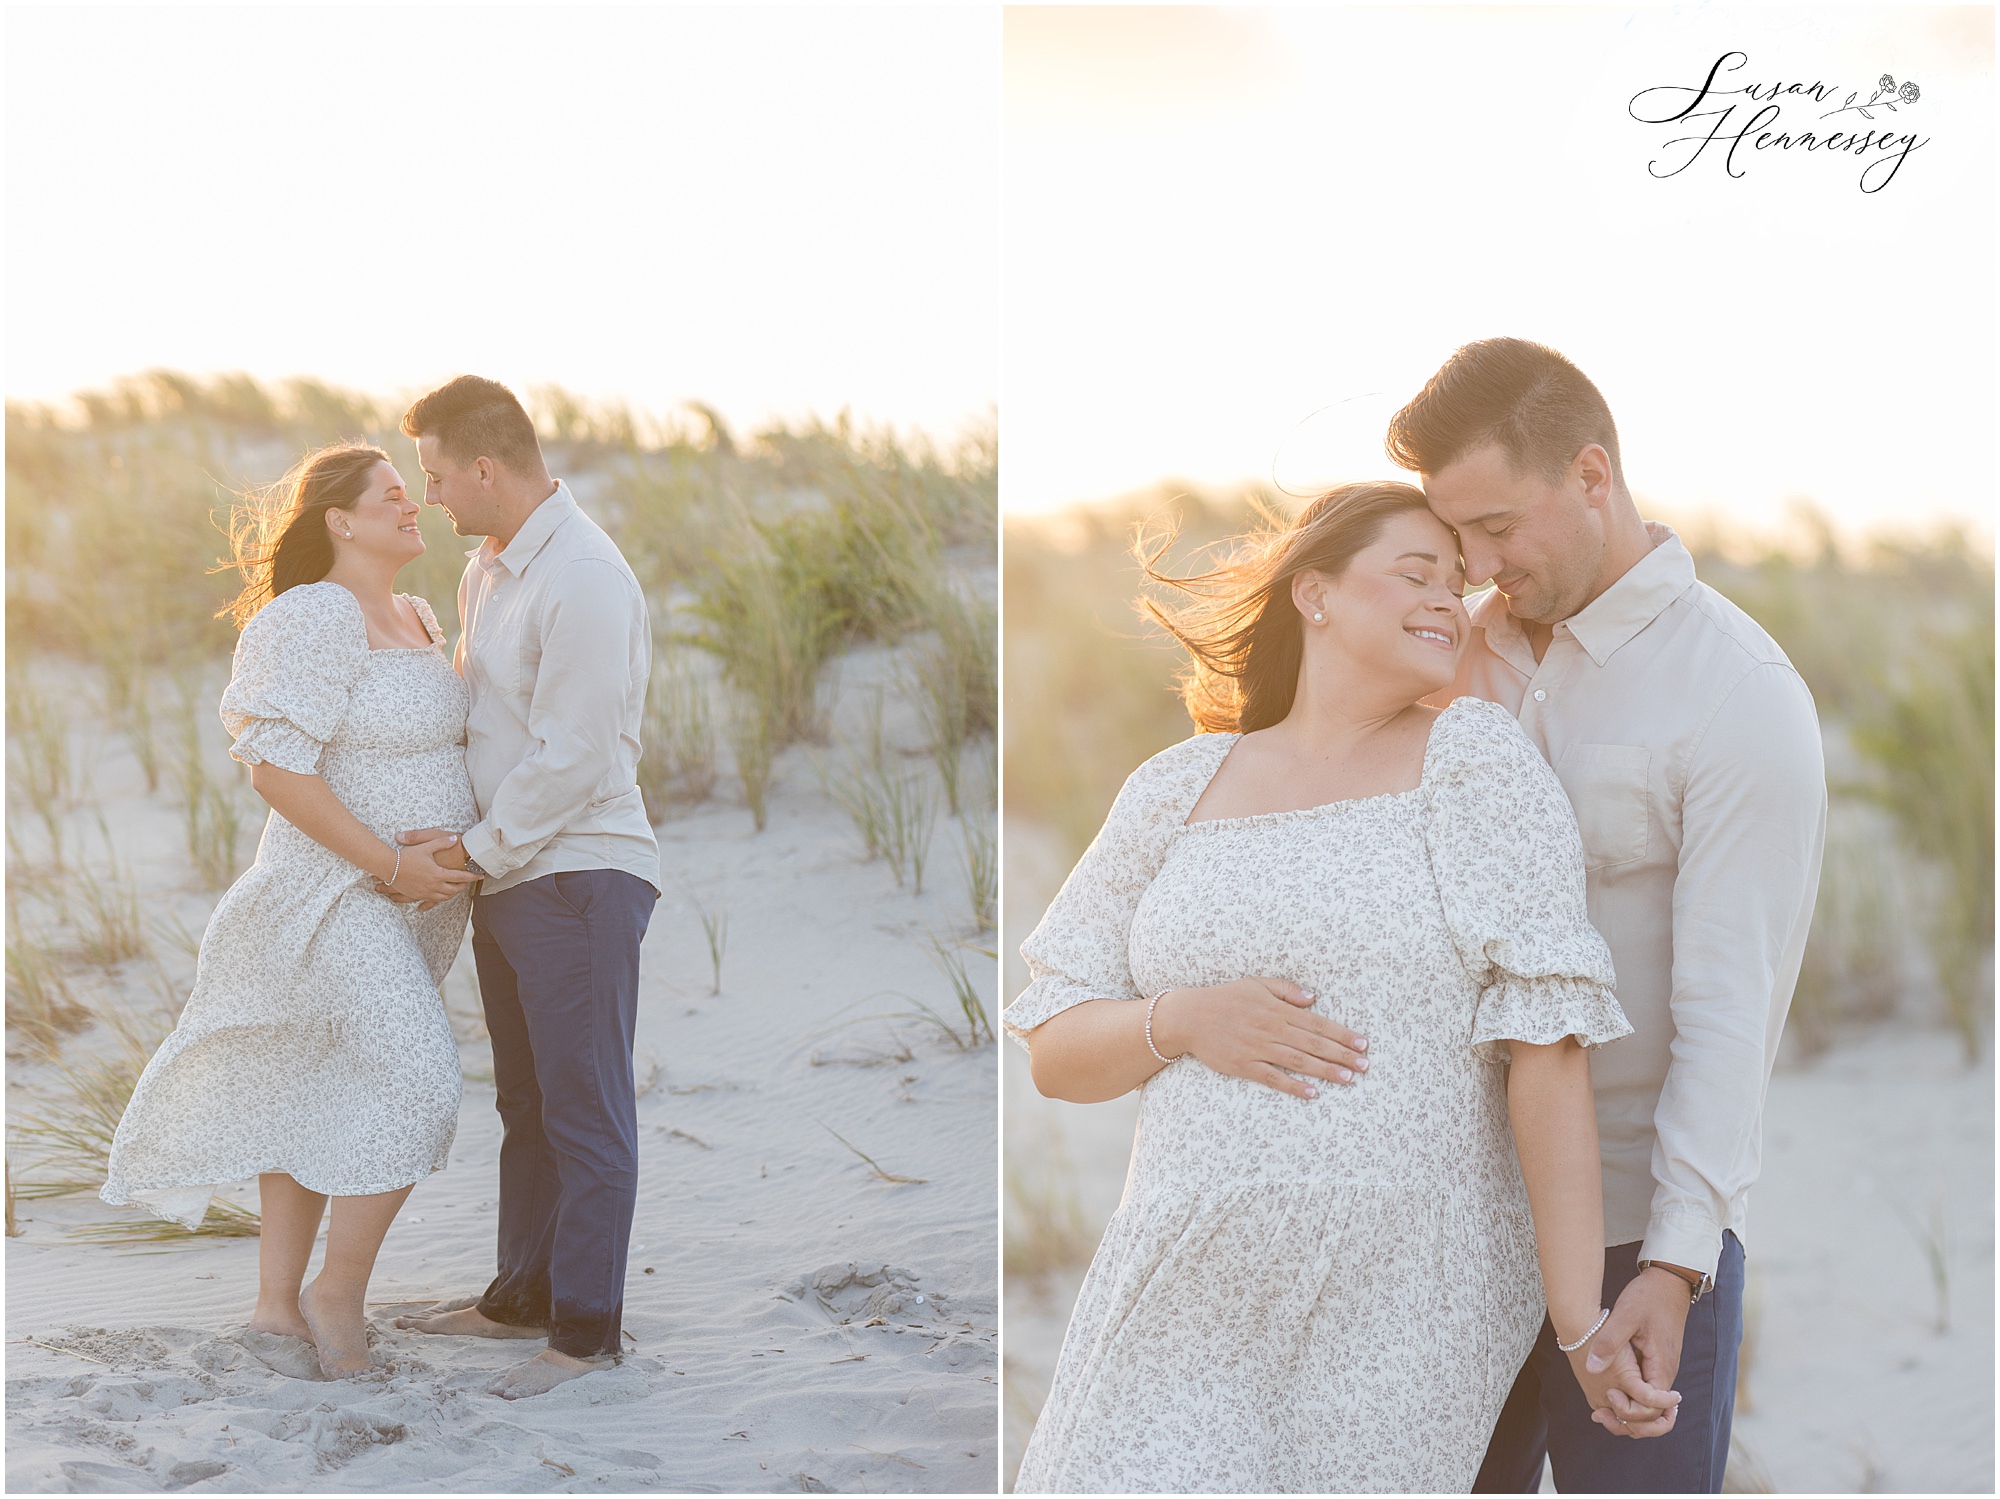 Sunset maternity sessions on the beach in OC NJ